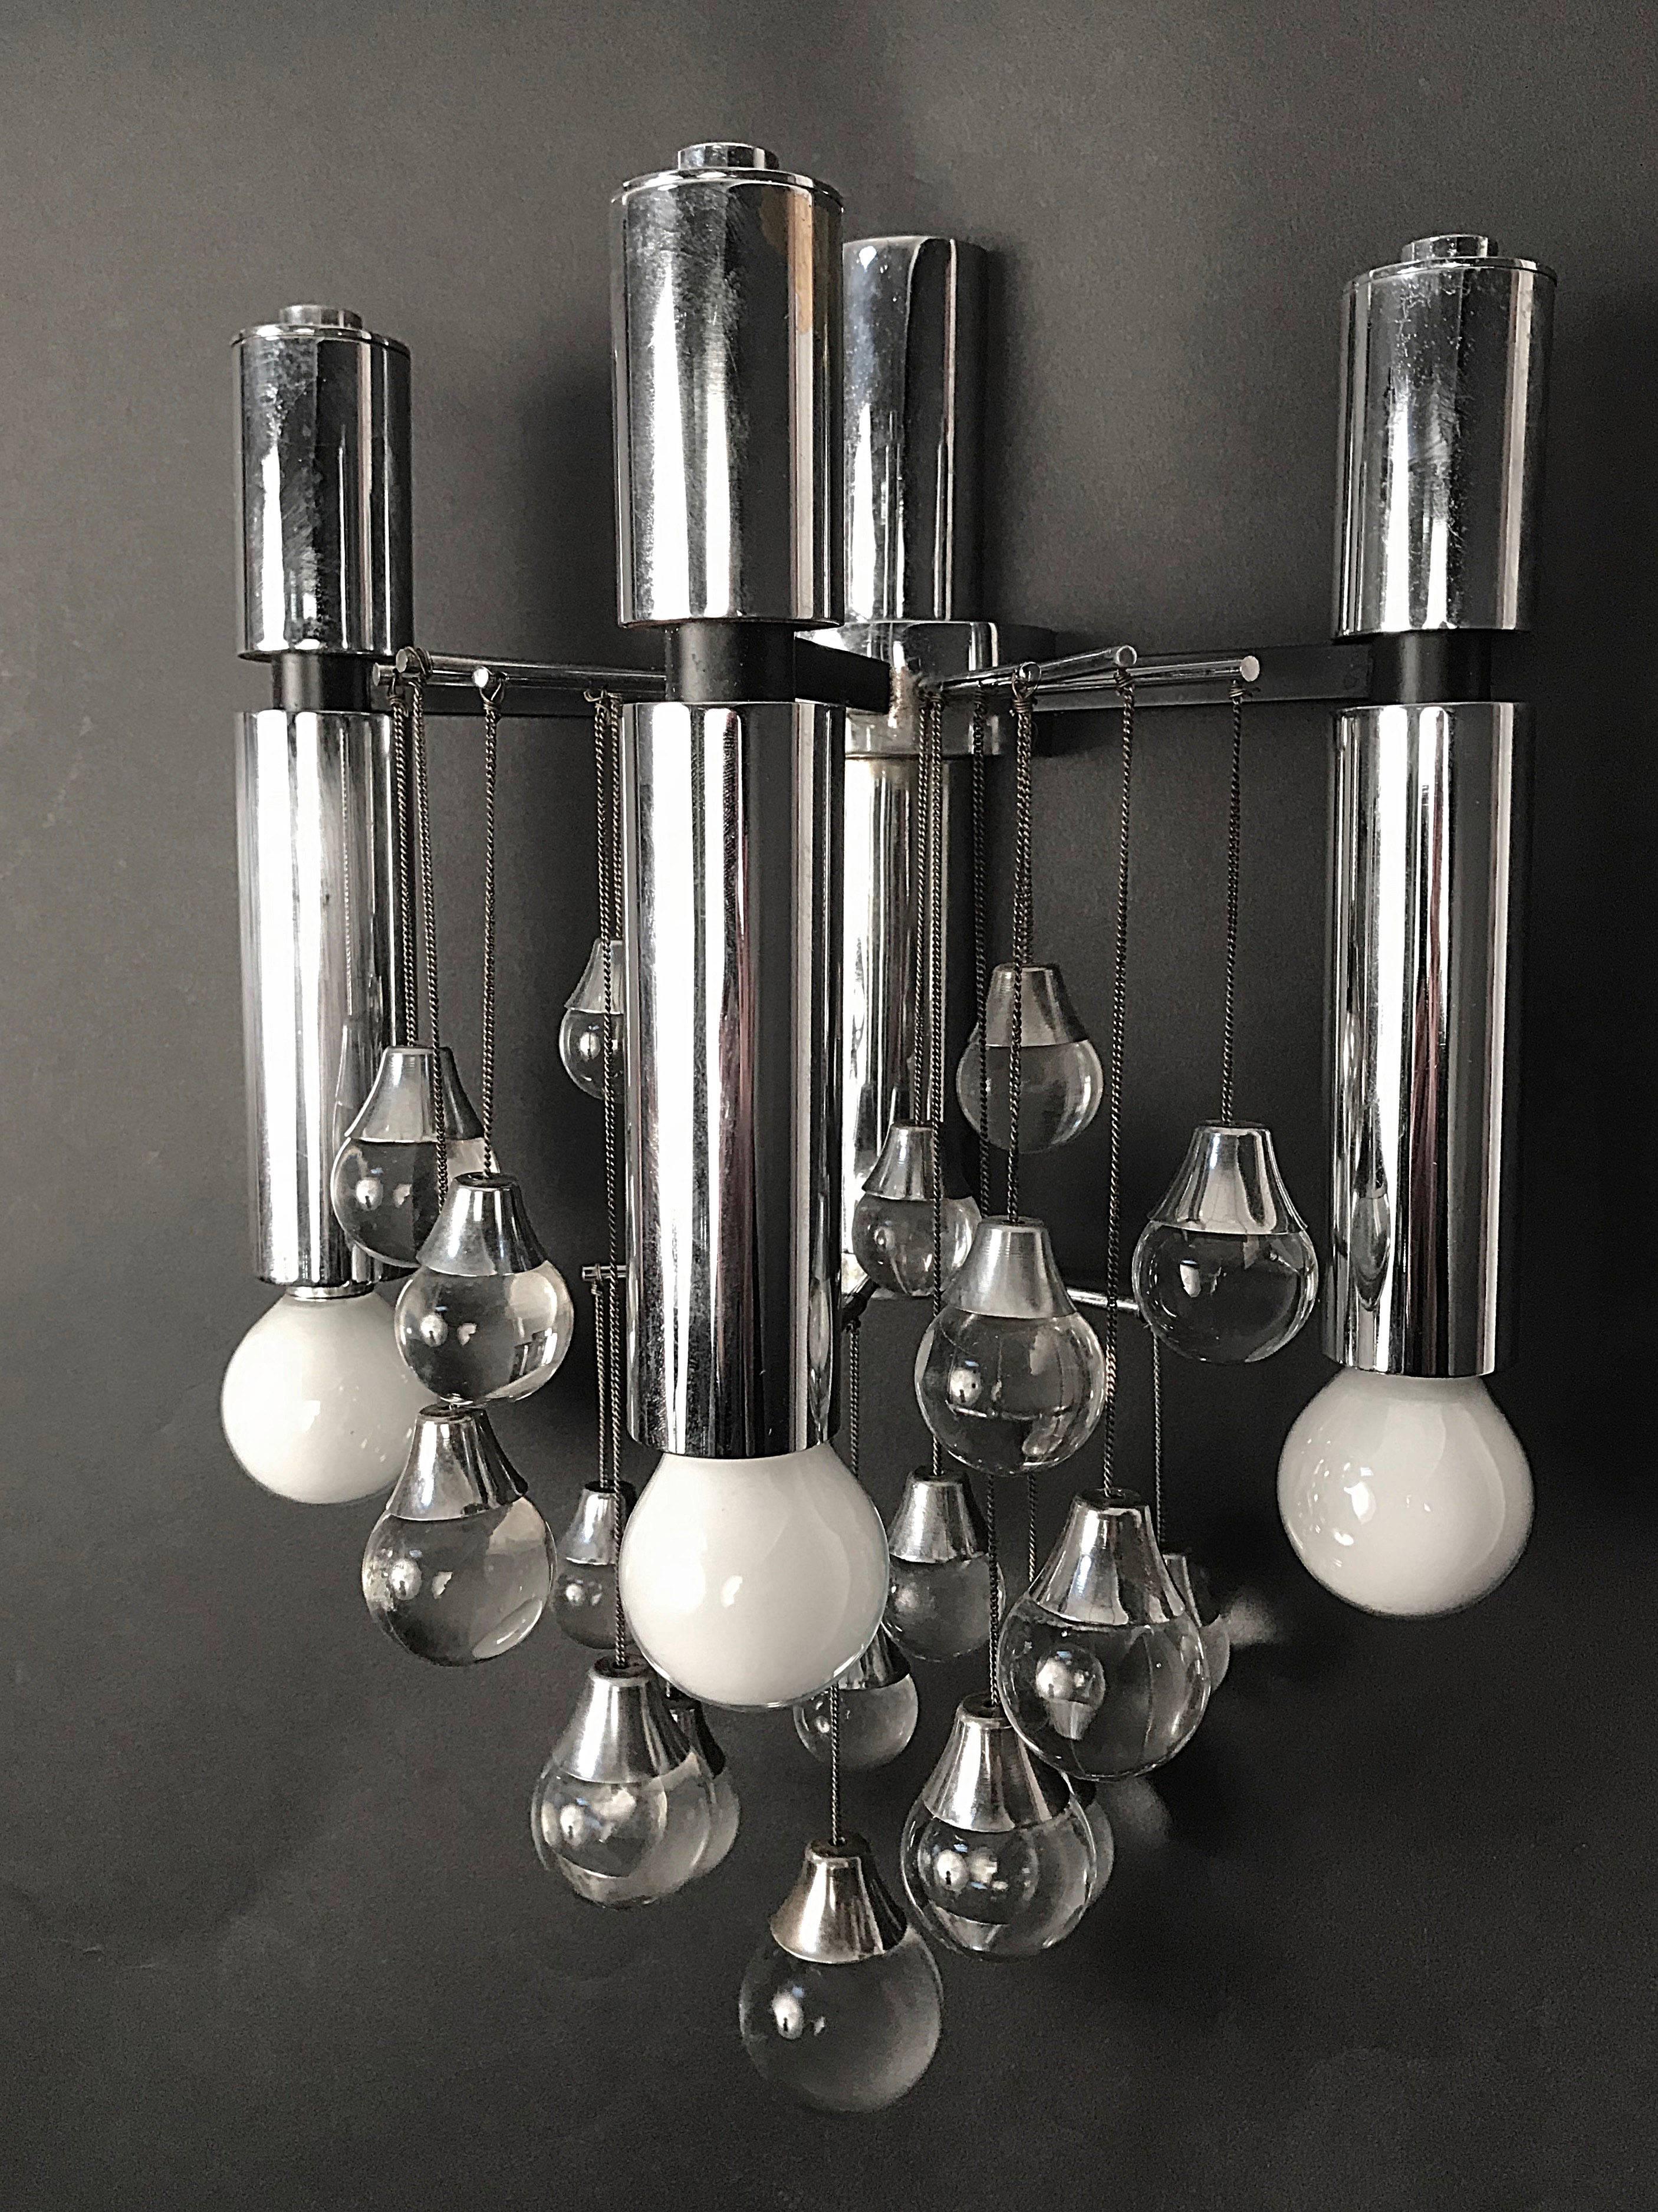 Pair of Sciolari Chrome and Glass Italian Sconces with Three Lights, 1960s For Sale 11